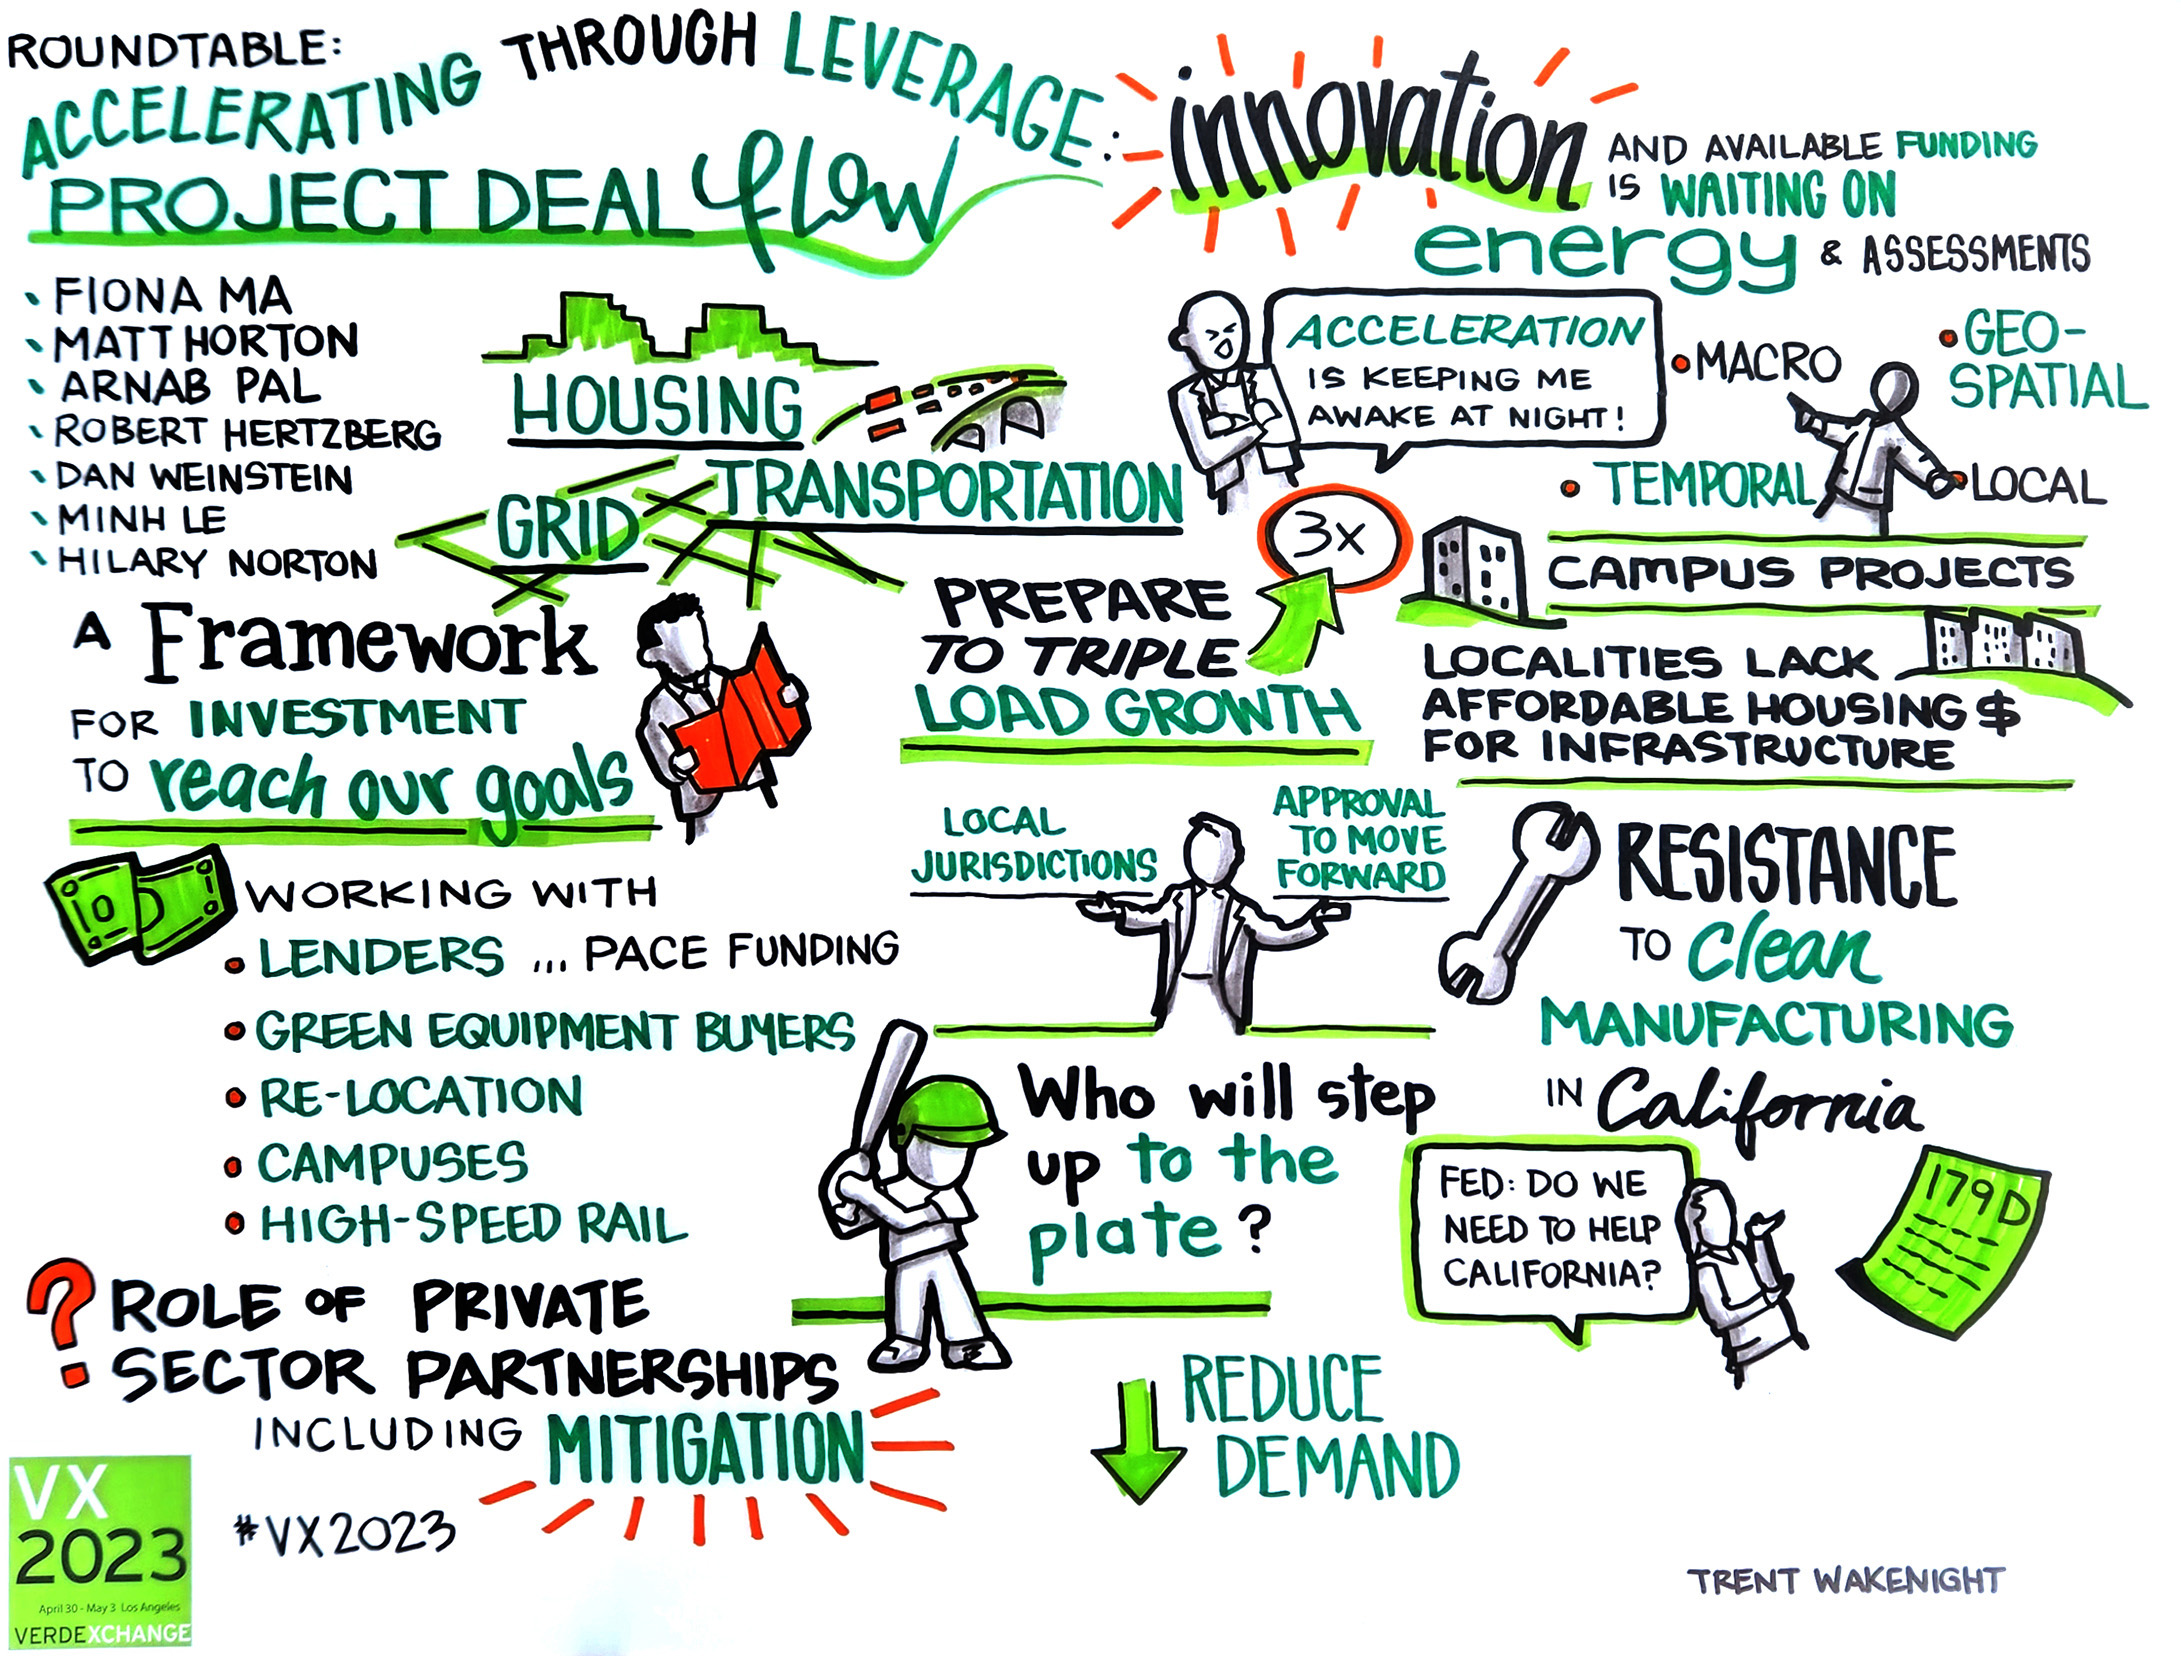 Graphic recording of content from Accelerating Through Leverage: Project Deal Flow roundtable